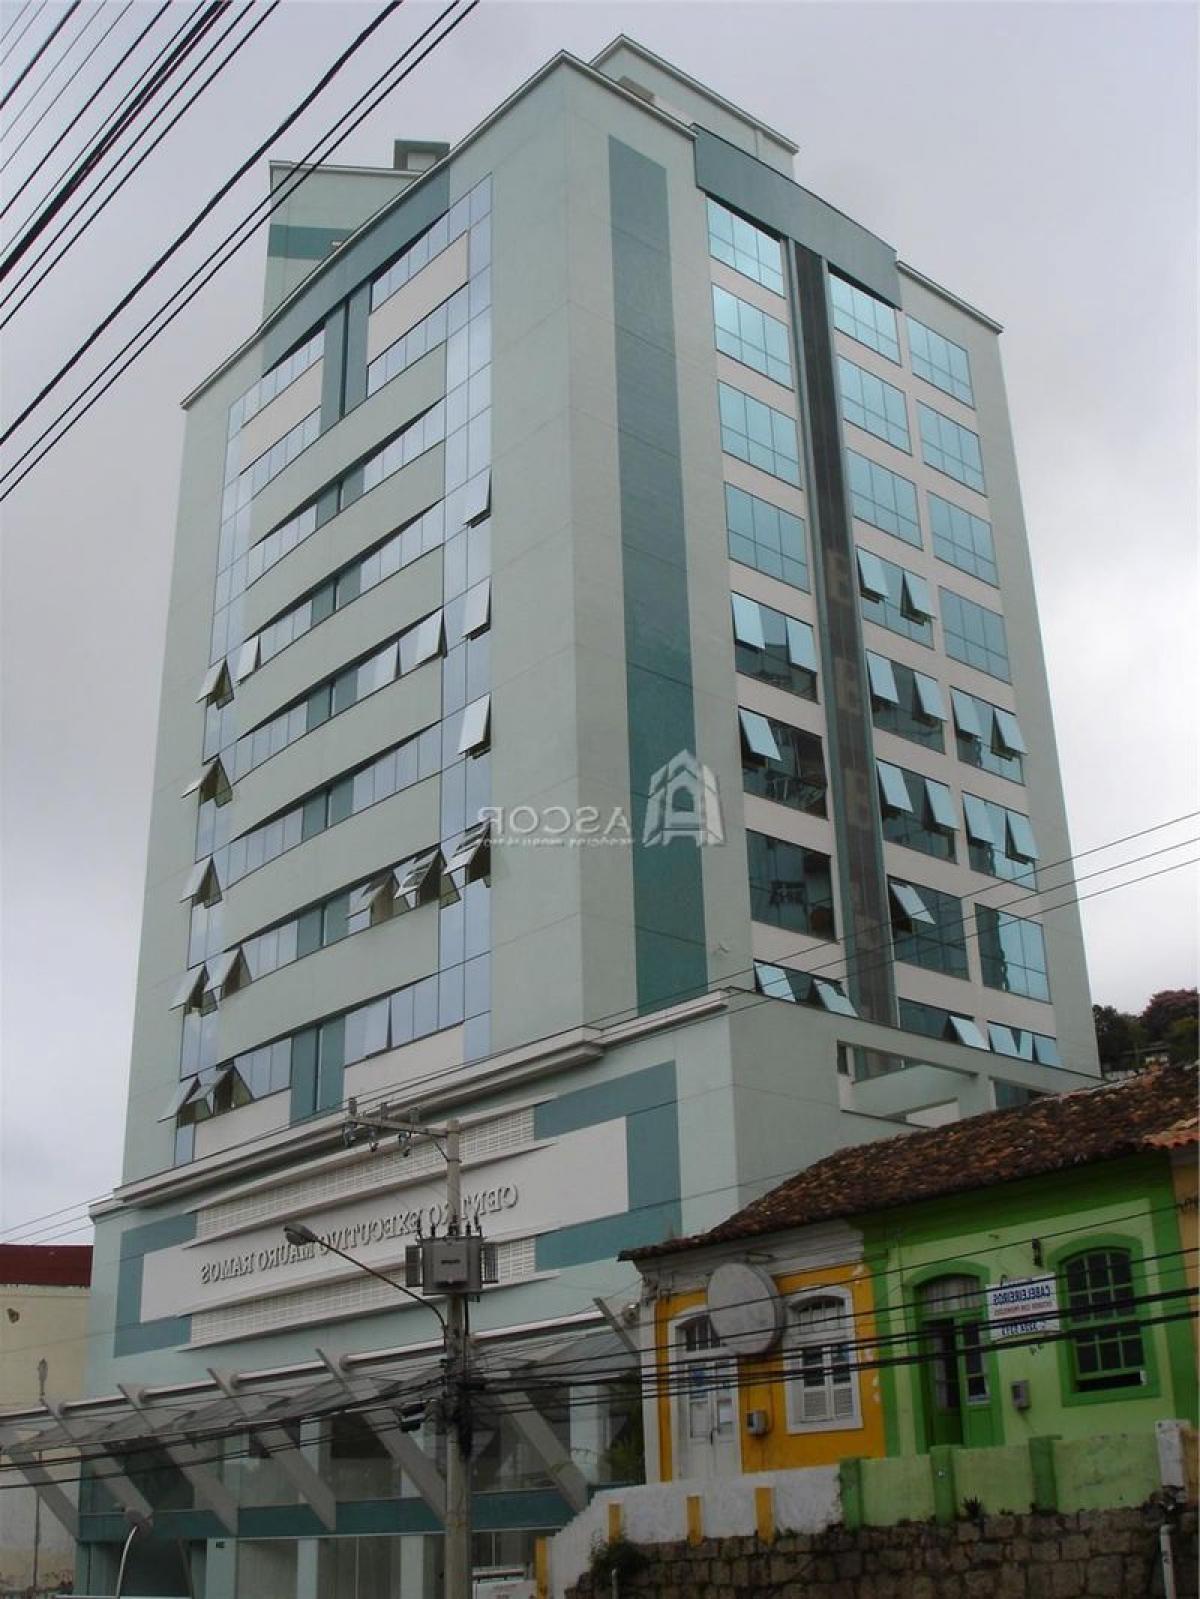 Picture of Commercial Building For Sale in Florianopolis, Santa Catarina, Brazil